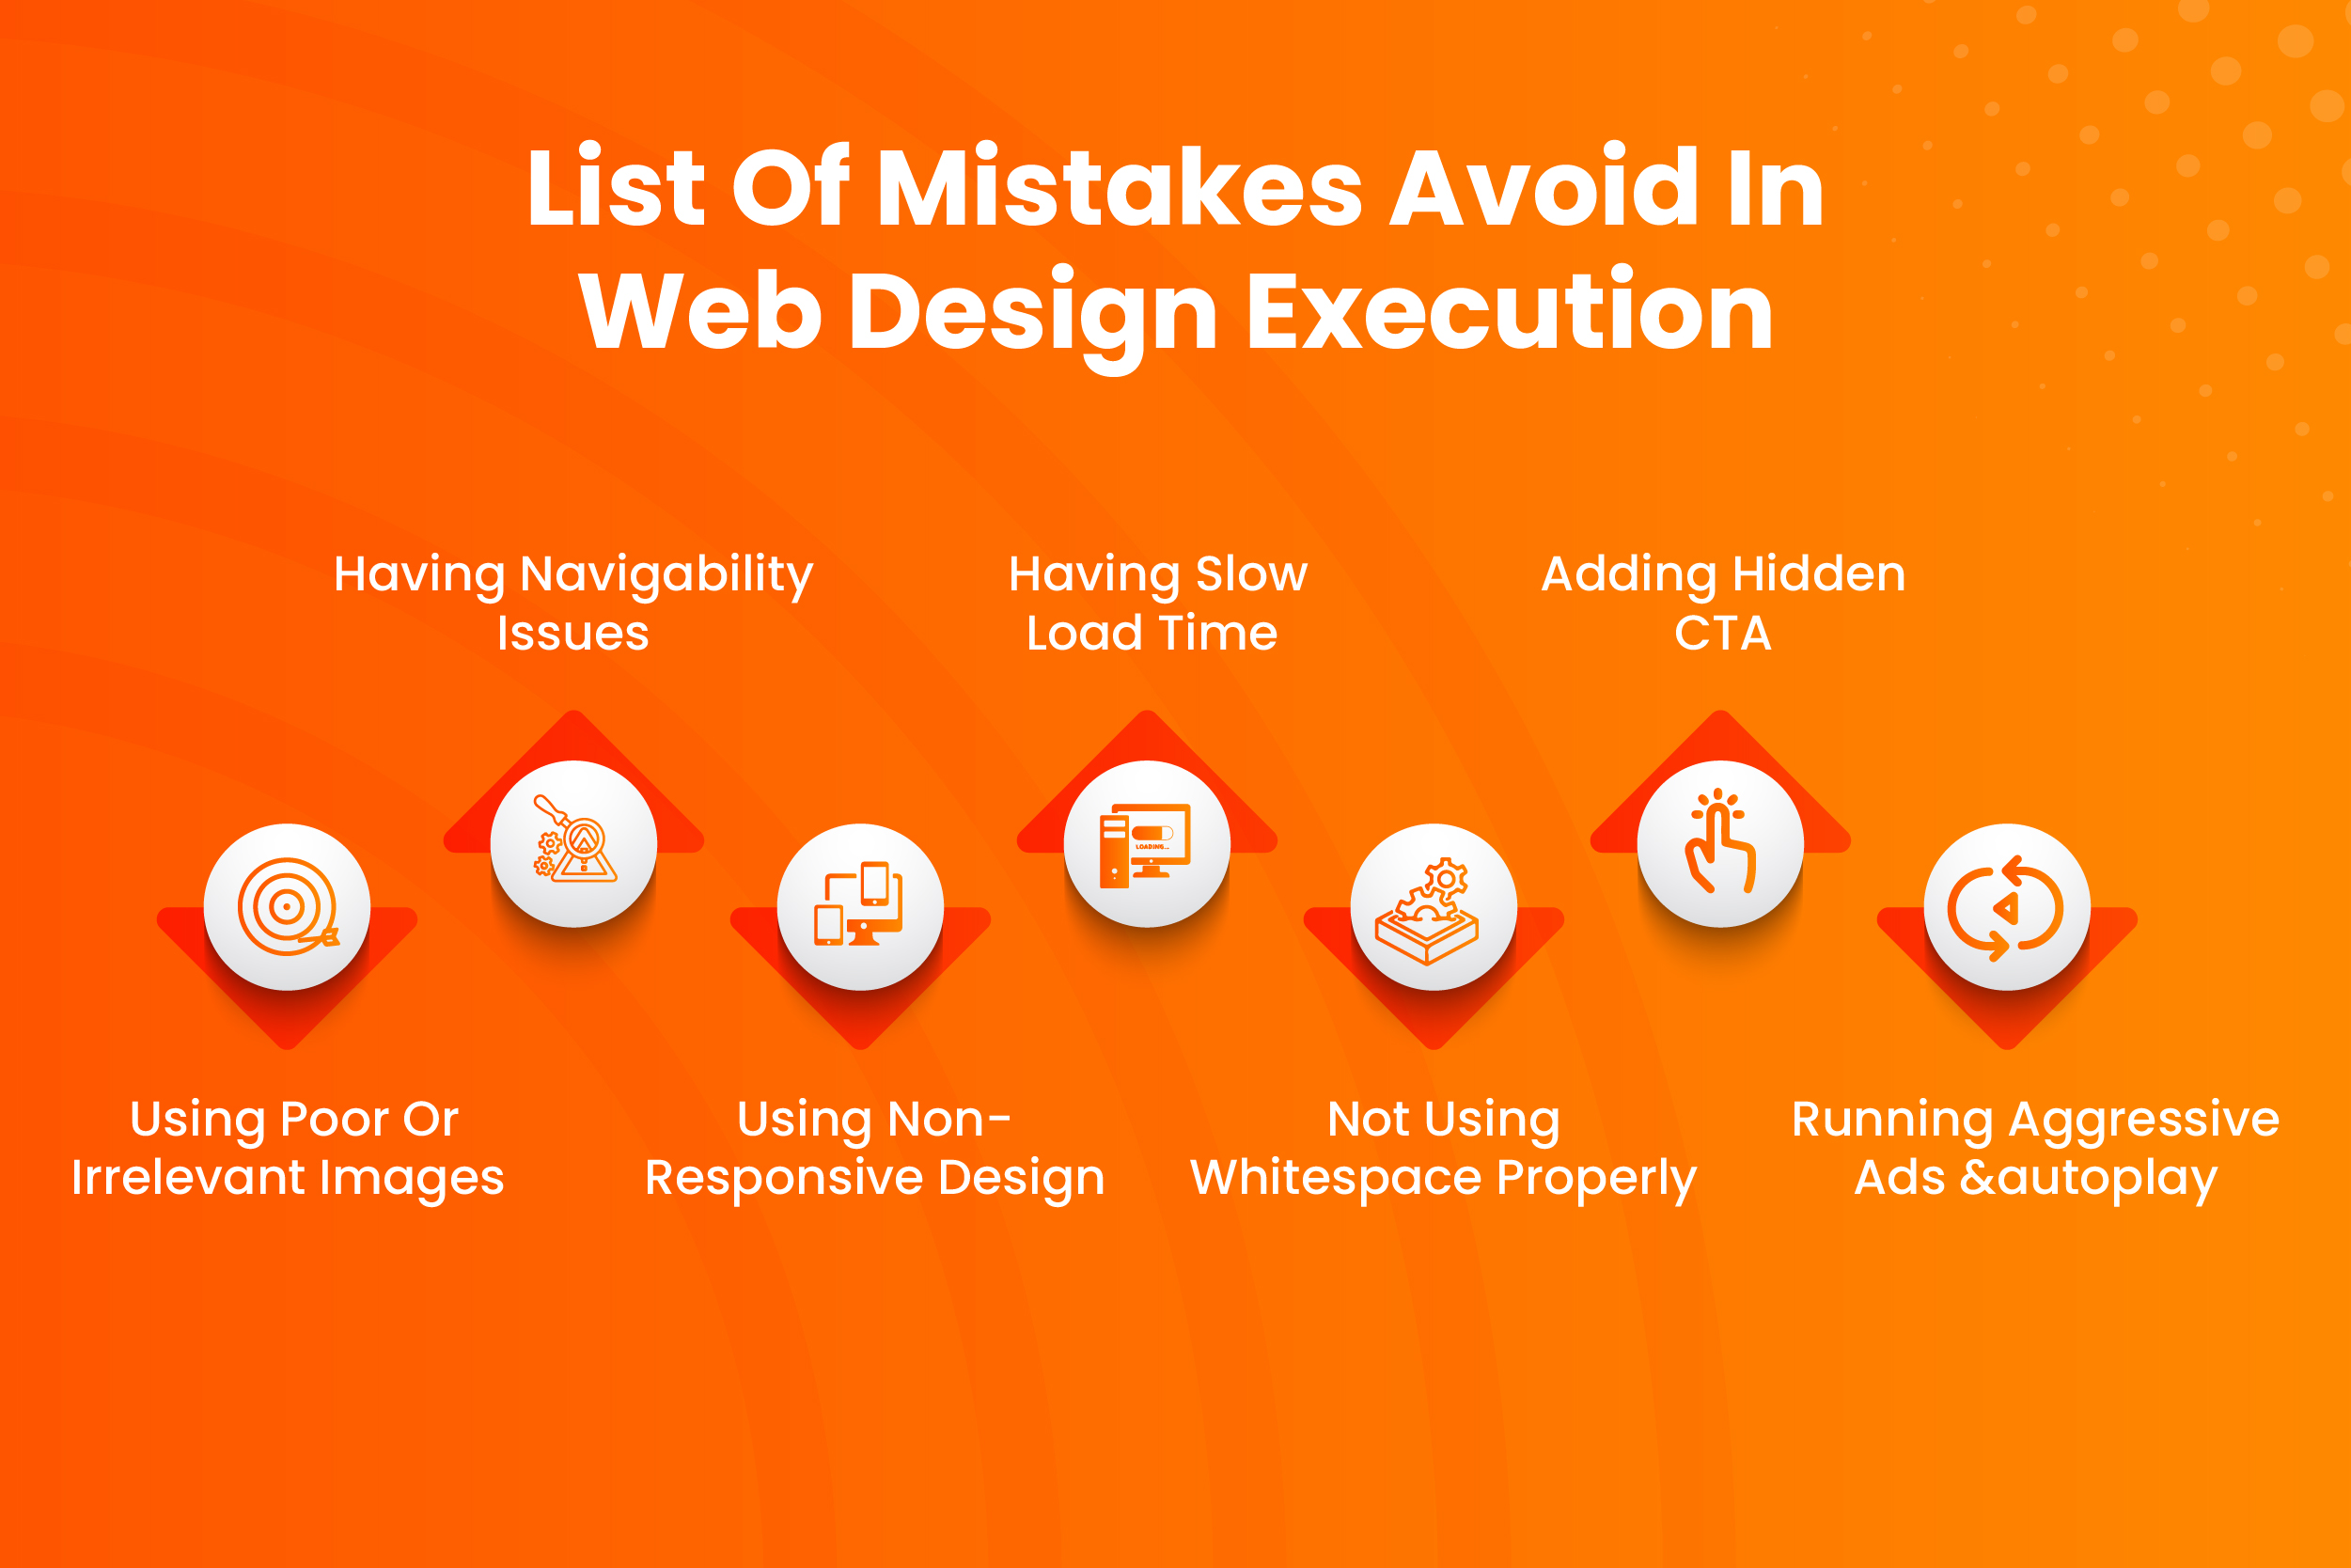 Mistakes To Avoid In Web Design Execution - 7 Common Mistakes to Avoid in Web Design Execution